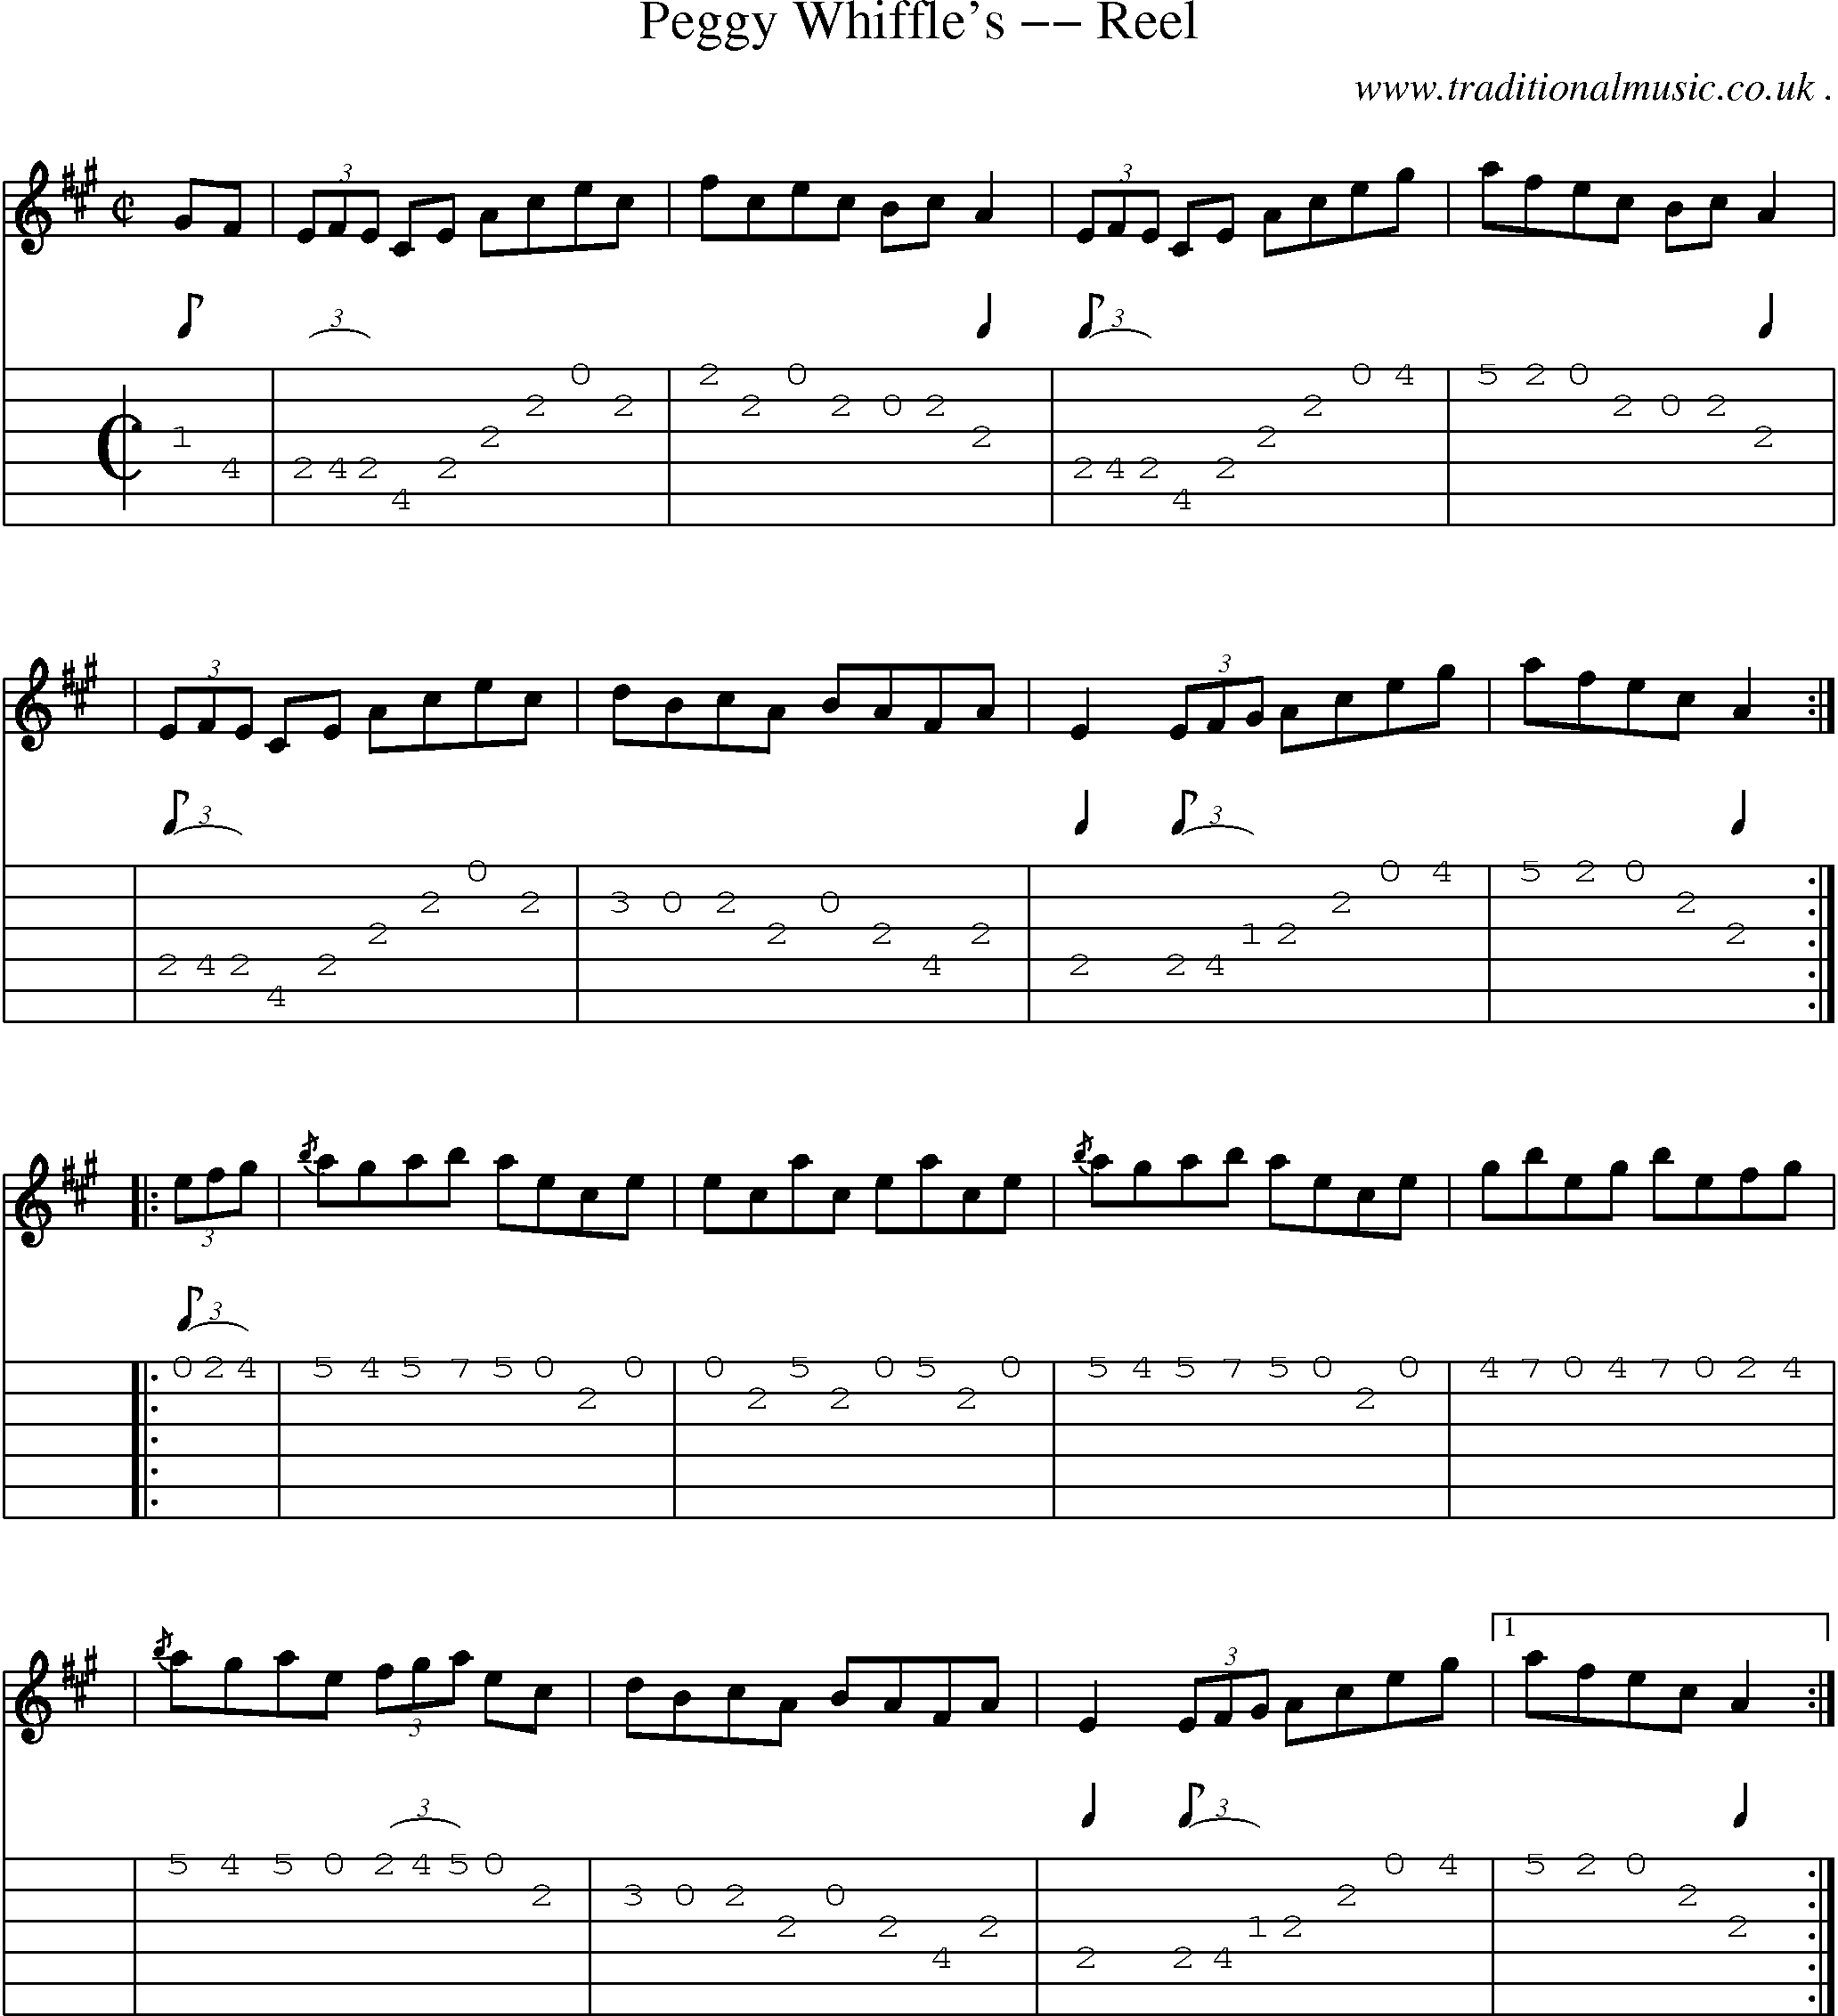 Sheet-music  score, Chords and Guitar Tabs for Peggy Whiffles -- Reel